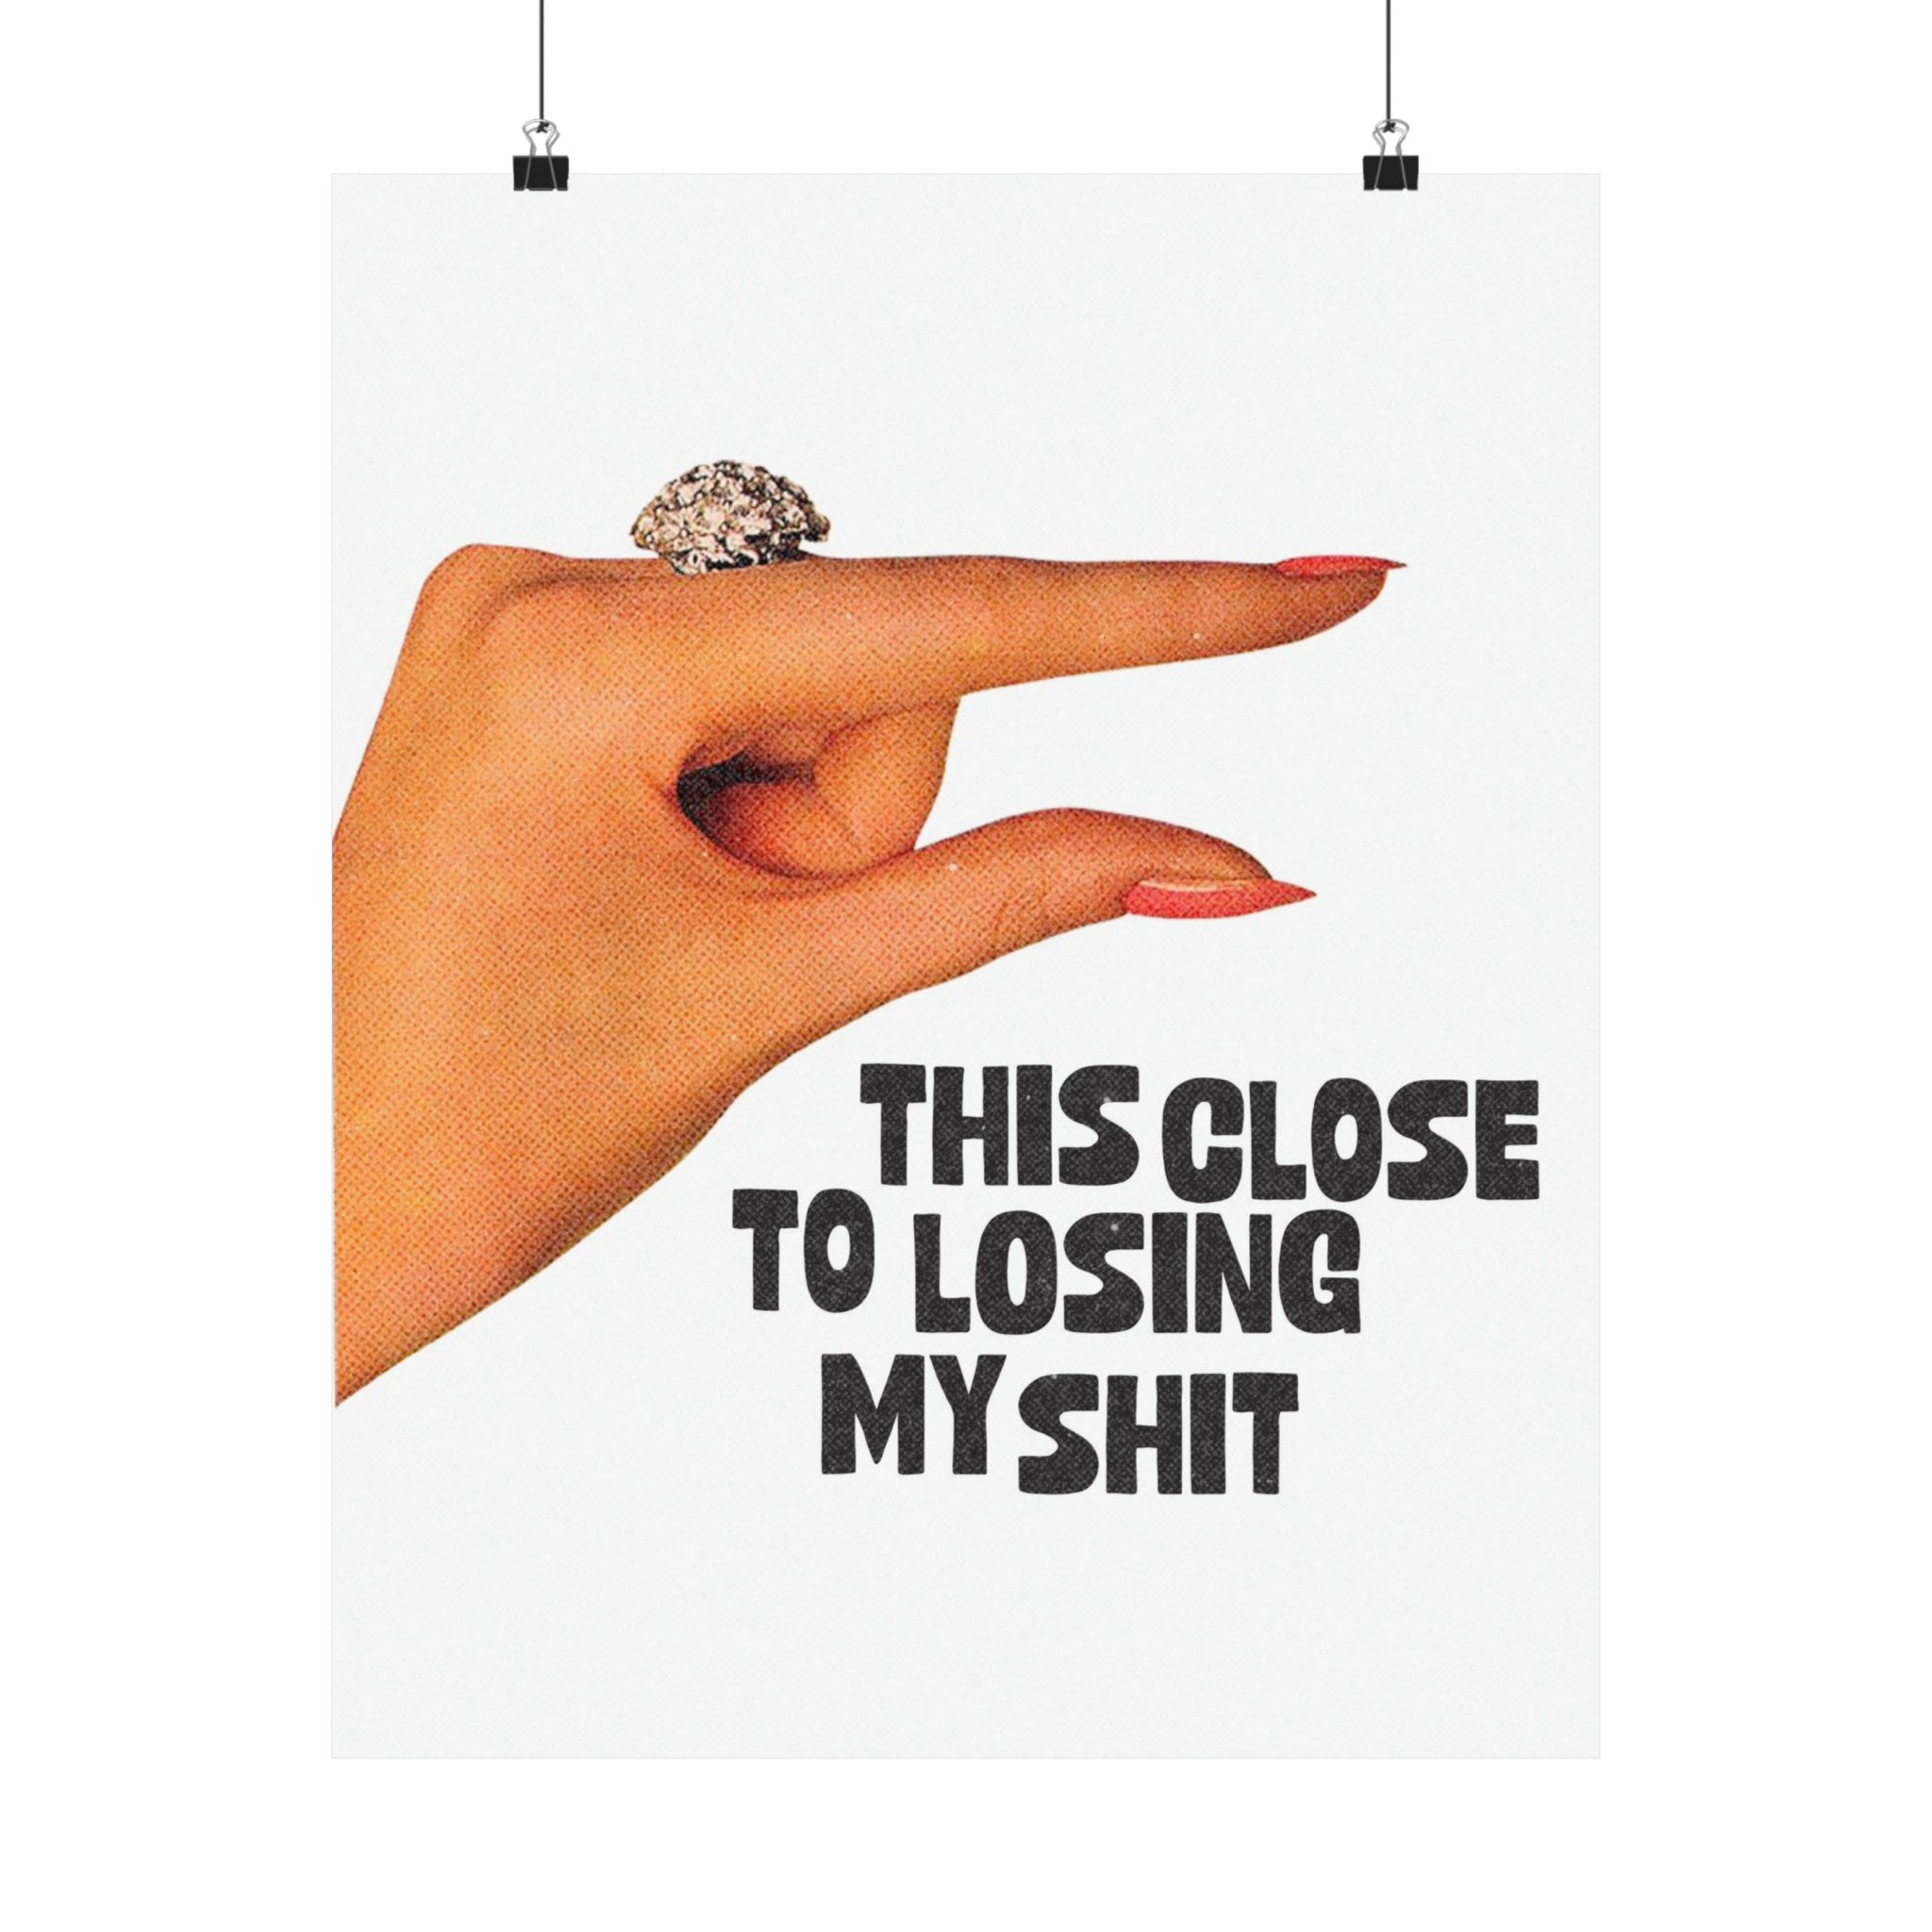 This Close to Losing My Shit Physical Poster